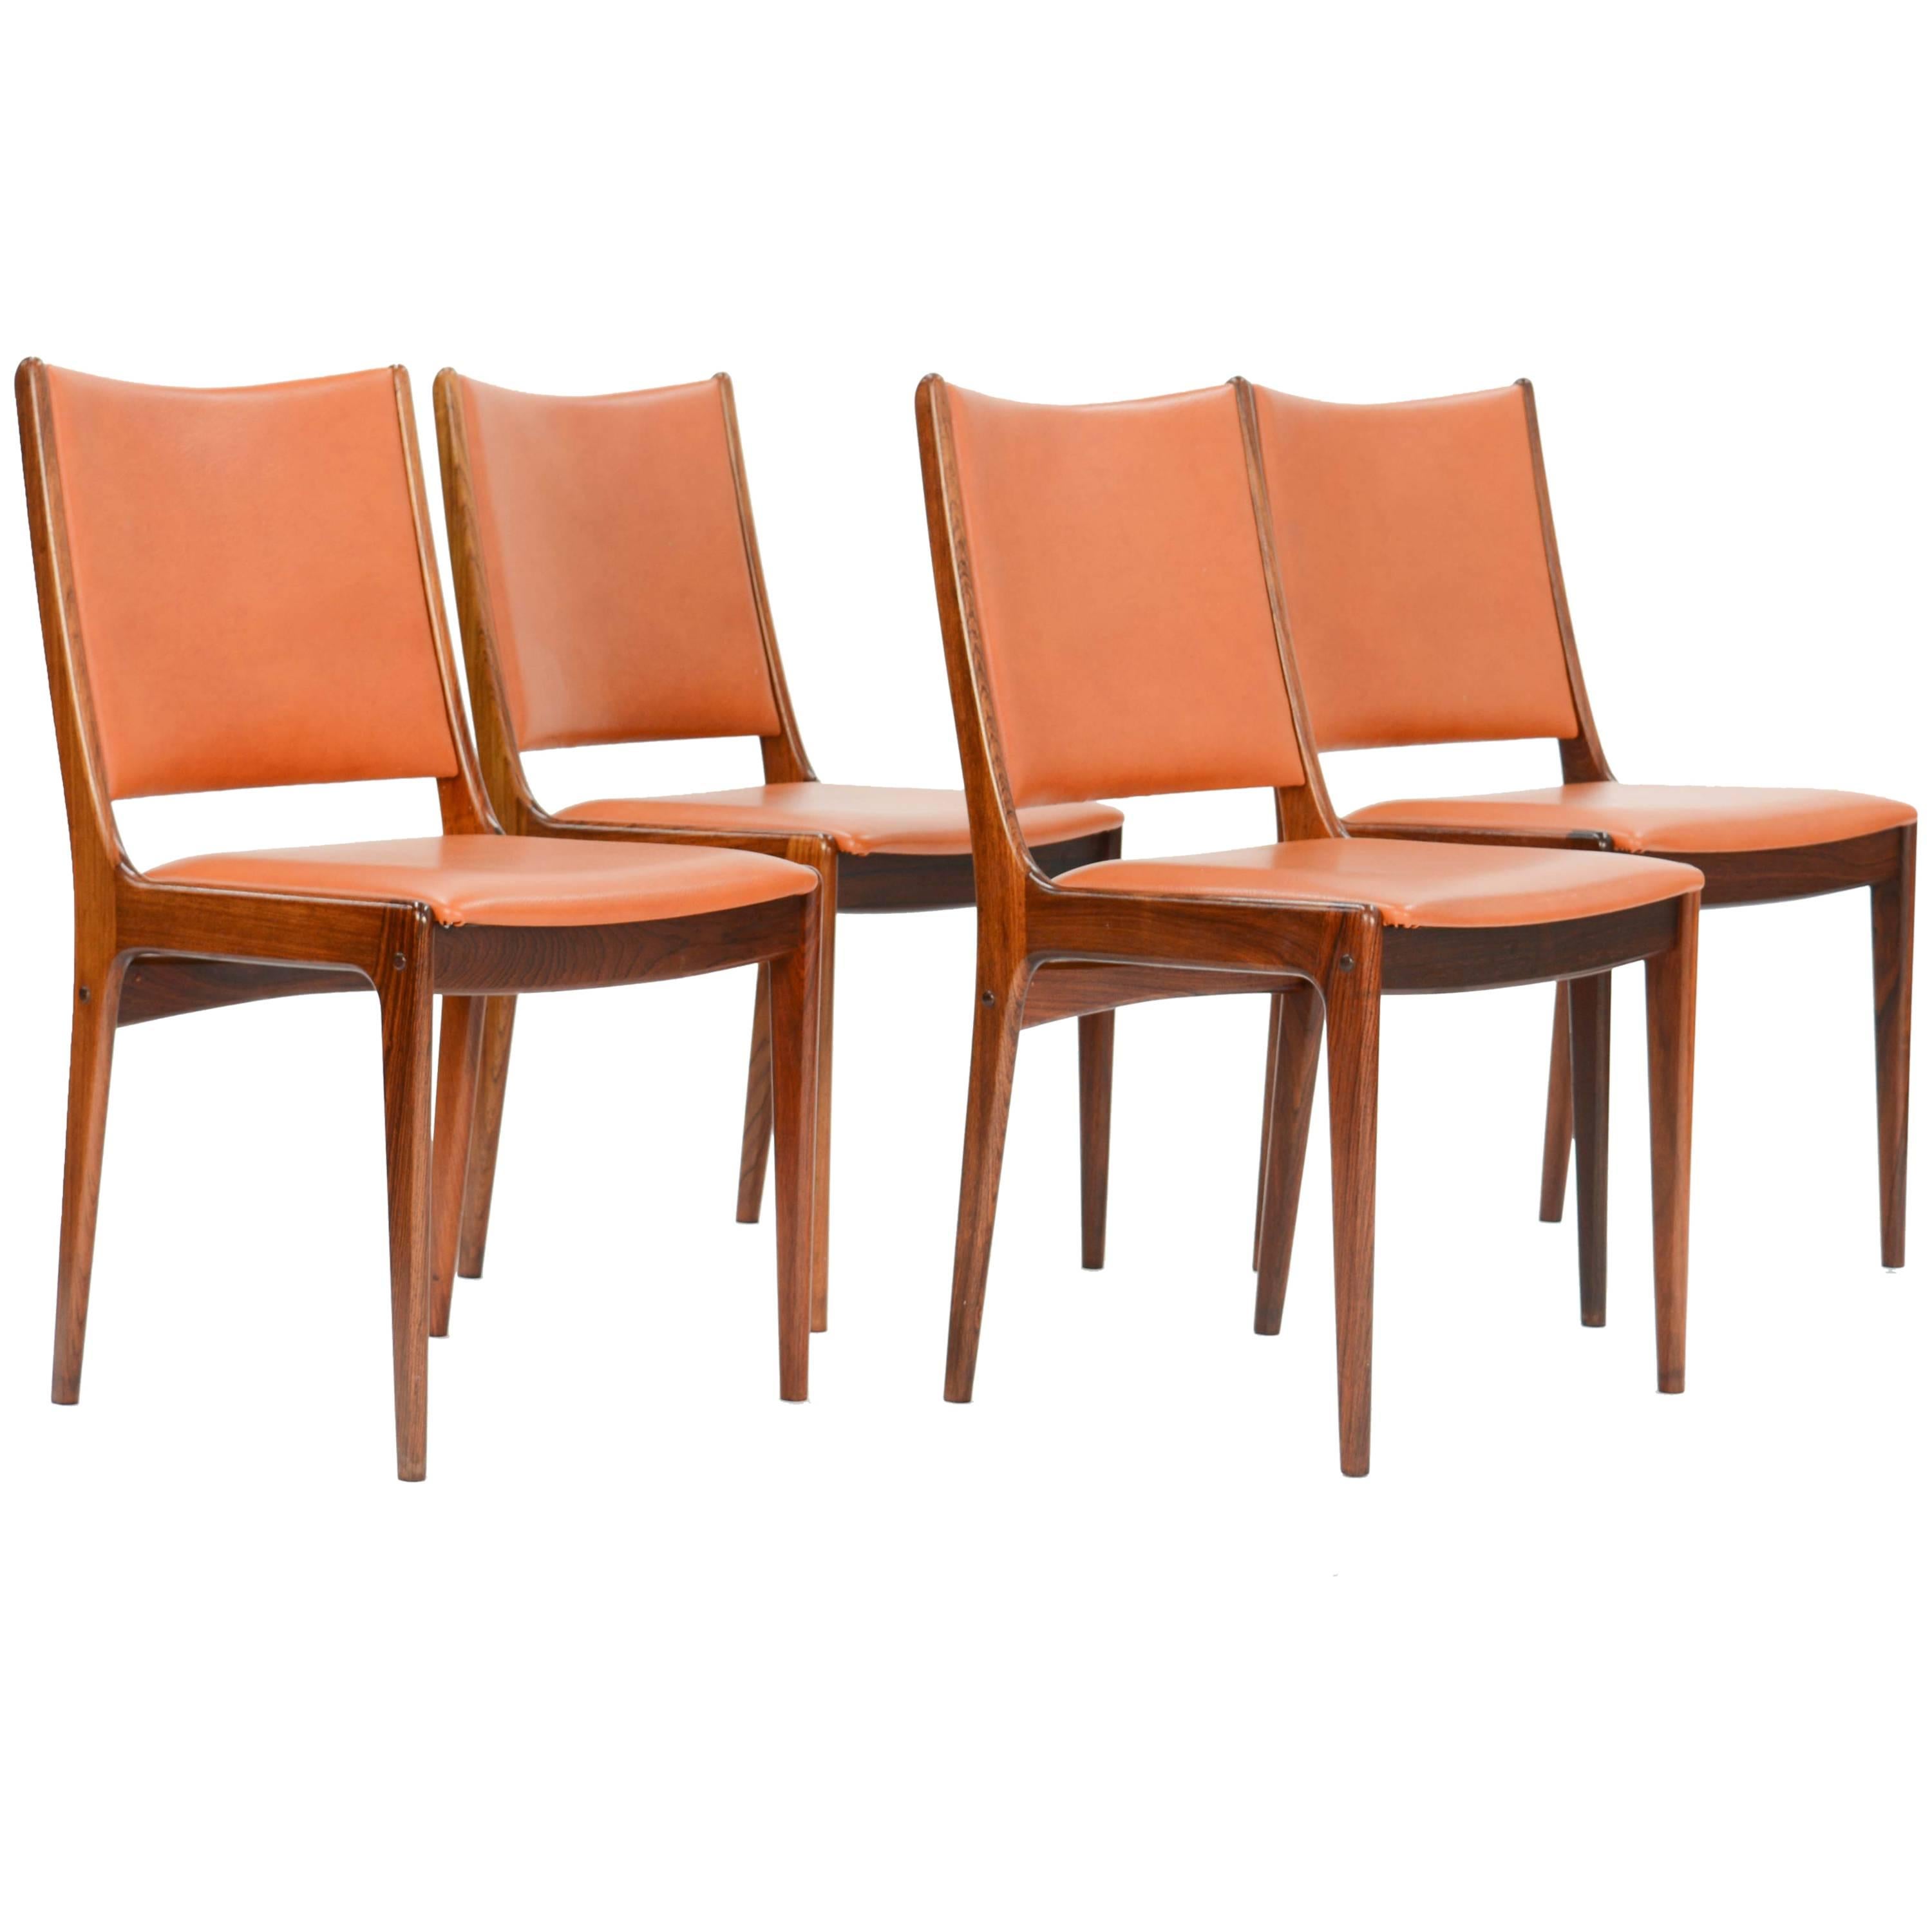 Set of Four Rosewood Side Chairs by Johannes Andersen for Uldum Møbelfabrik